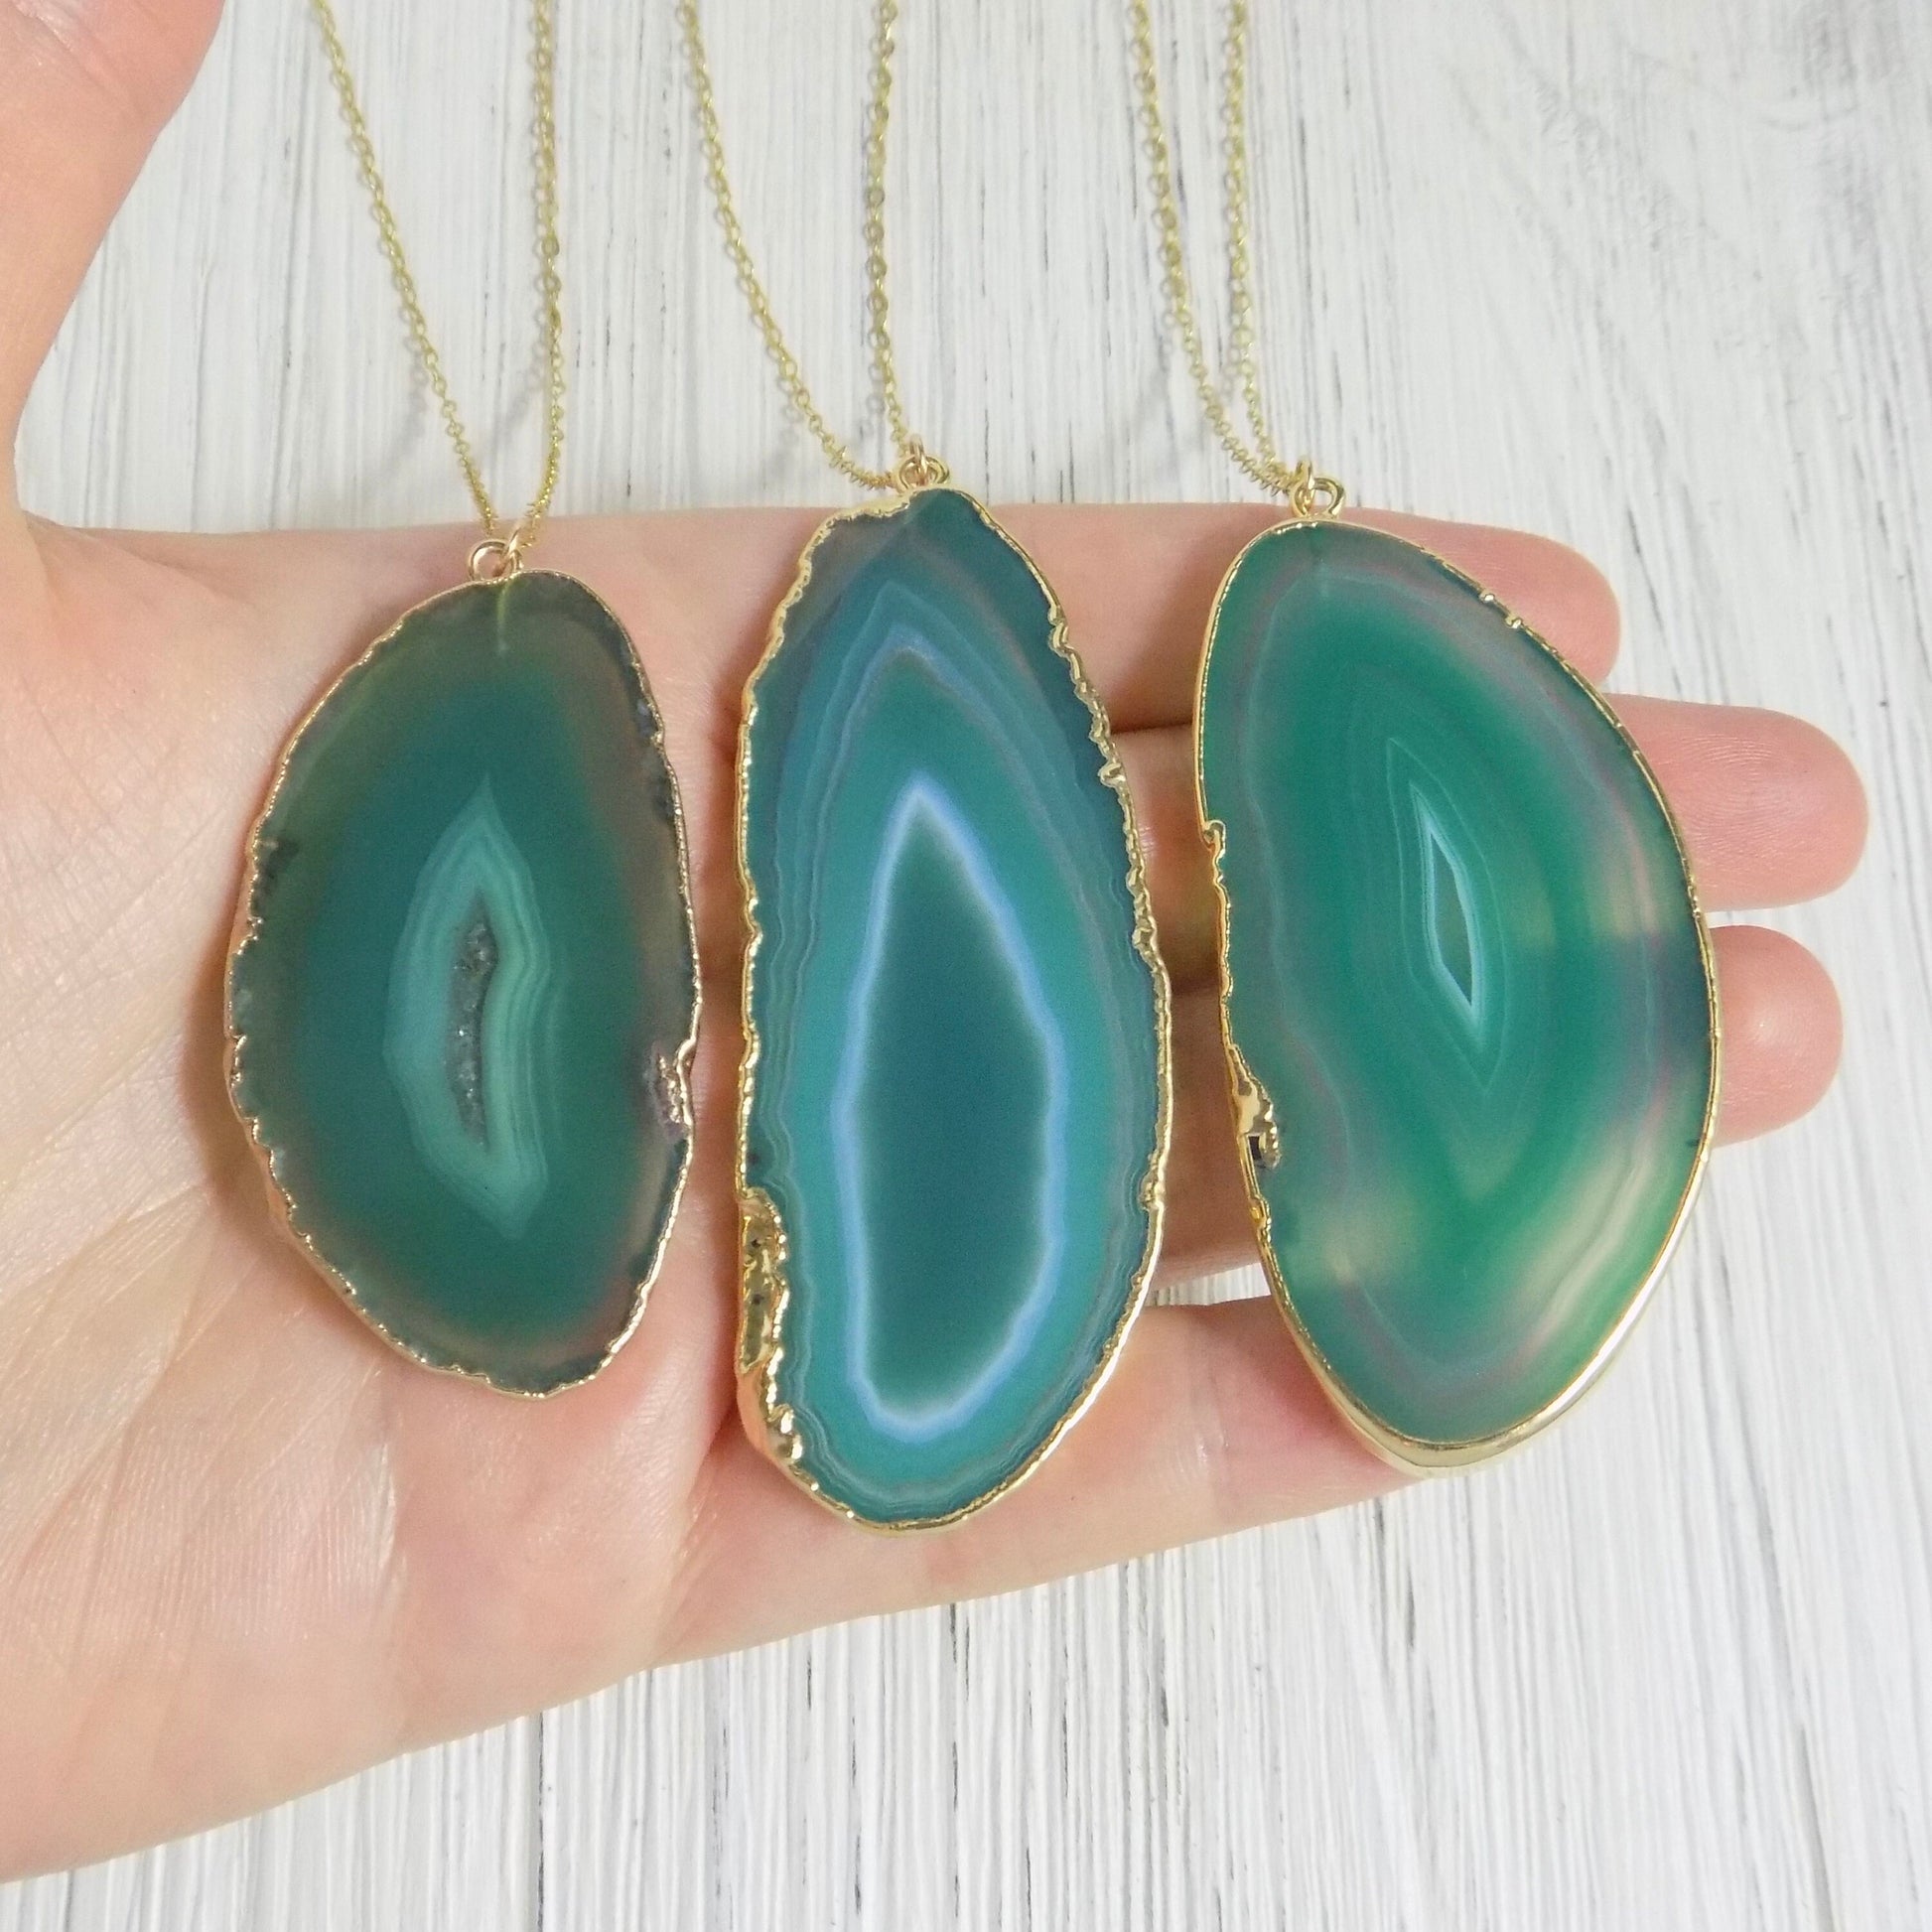 Small Agate Necklace - Green Agate Geode